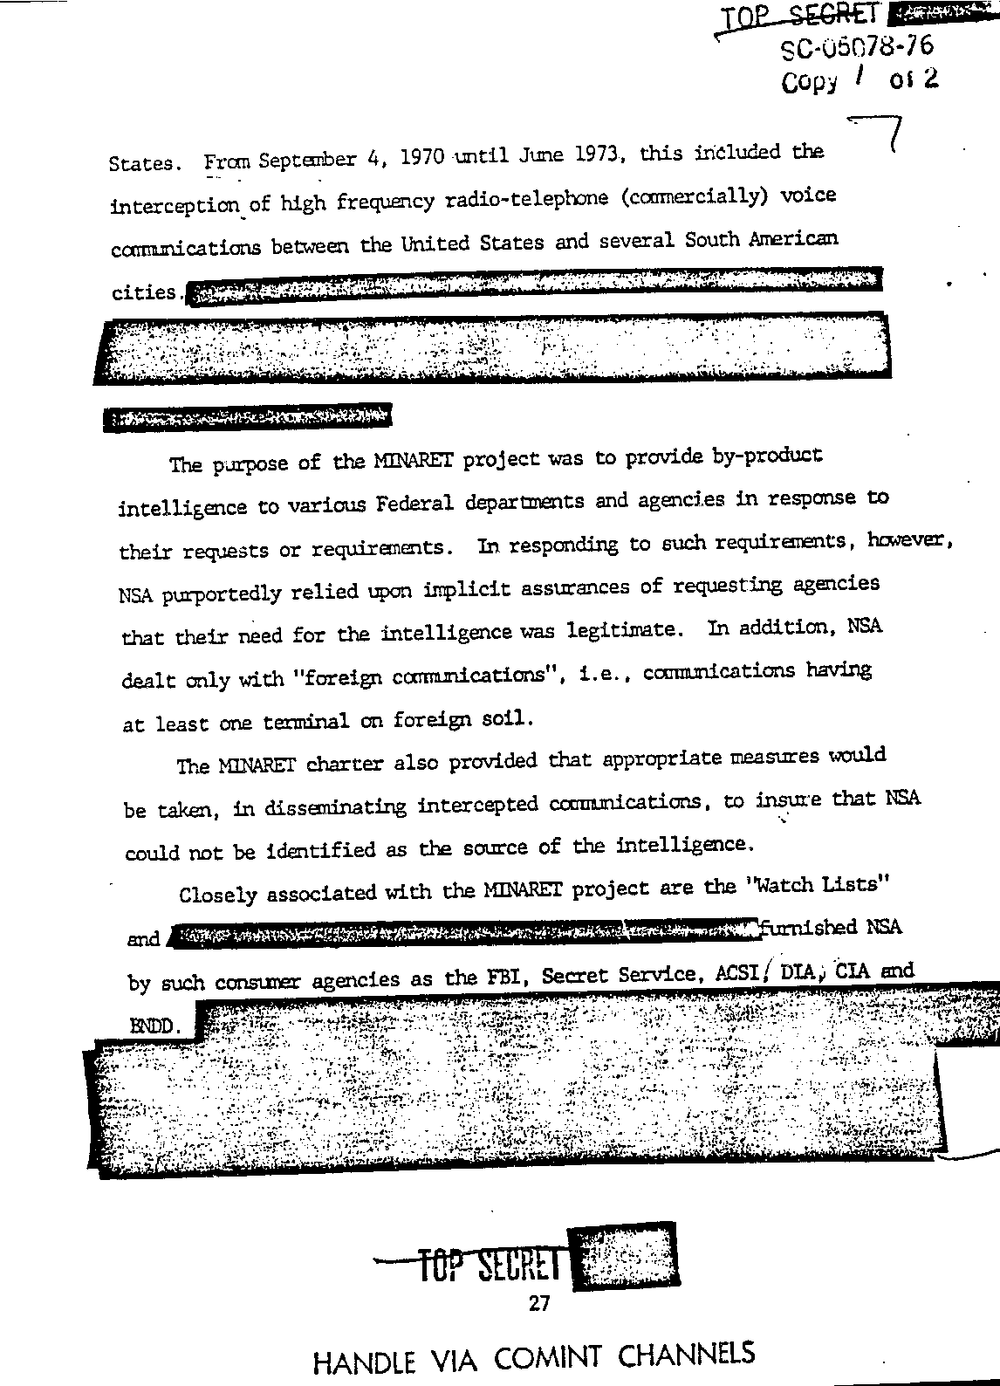 Page 35 from Report on Inquiry Into CIA Related Electronic Surveillance Activities